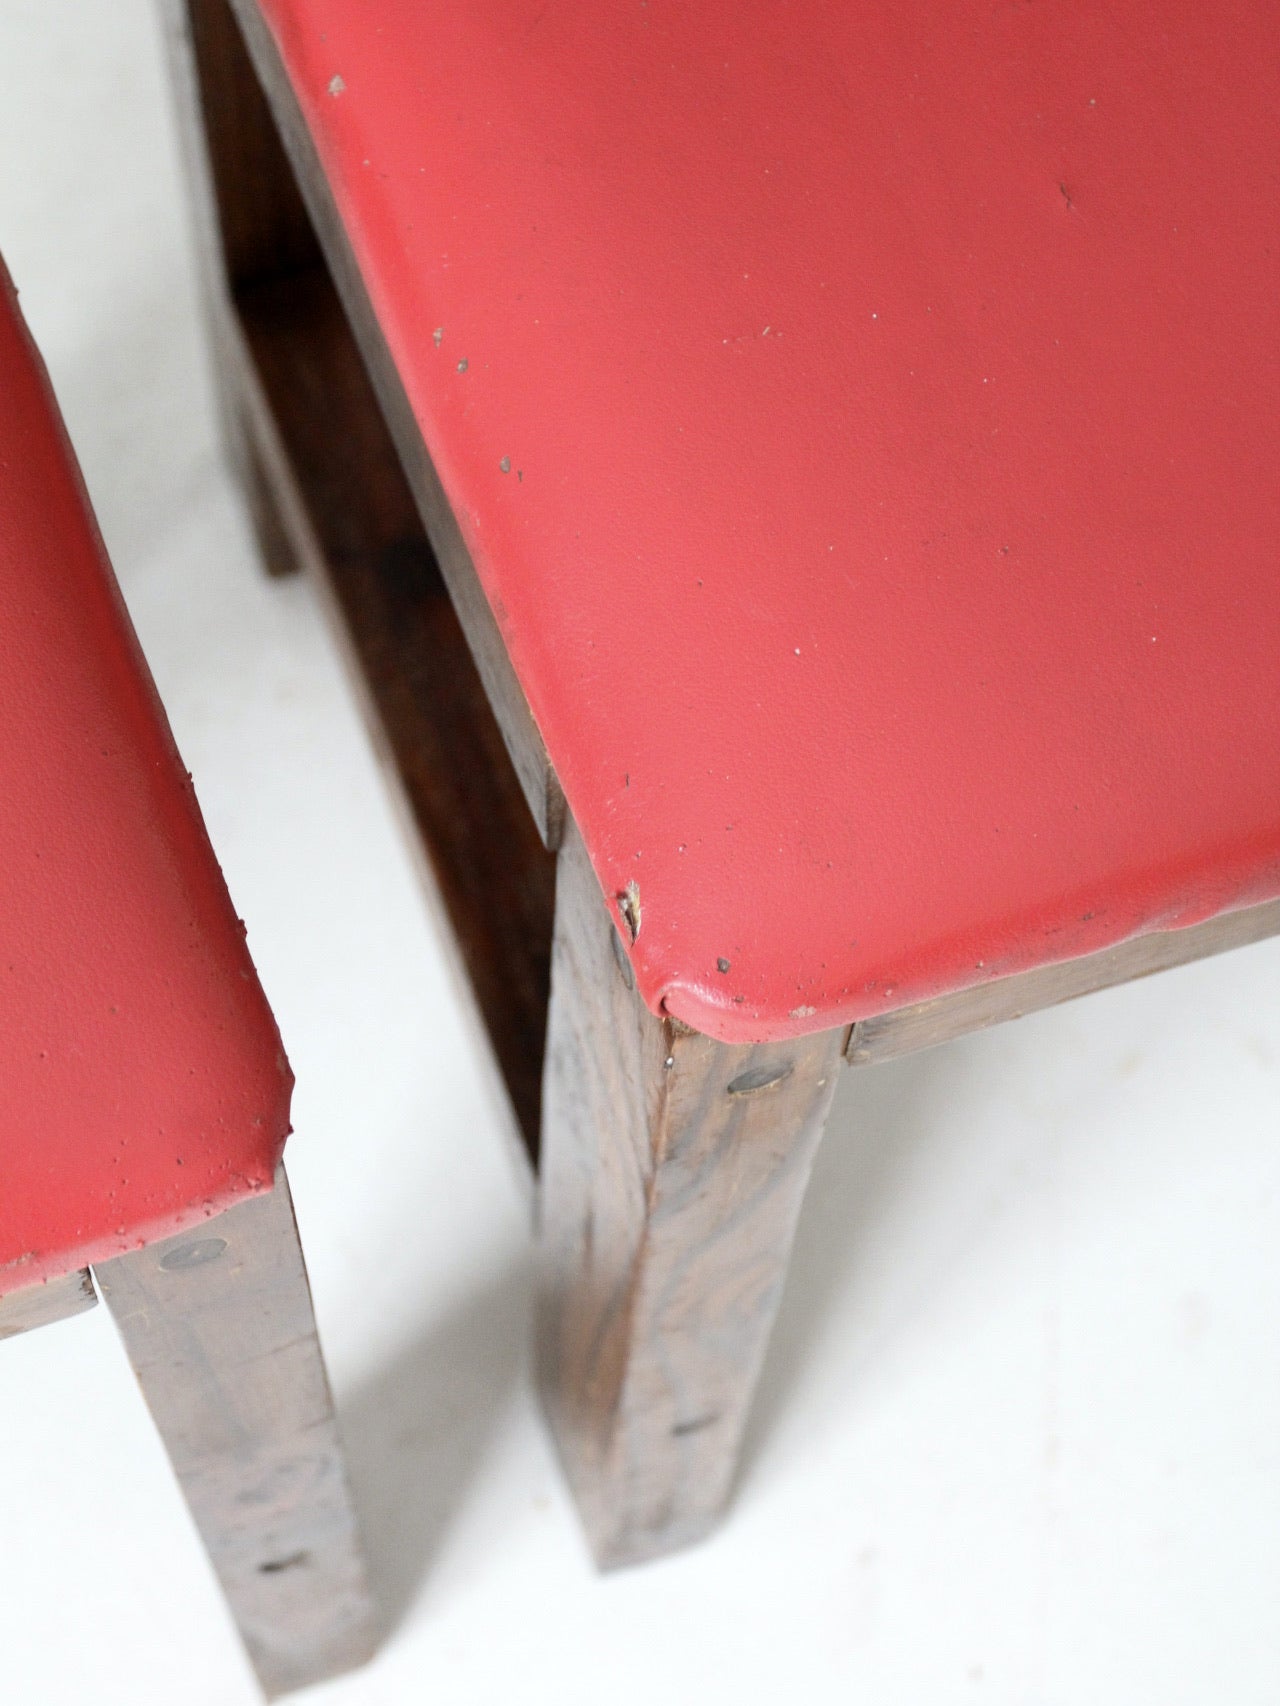 vintage upholstered seat wood chairs pair